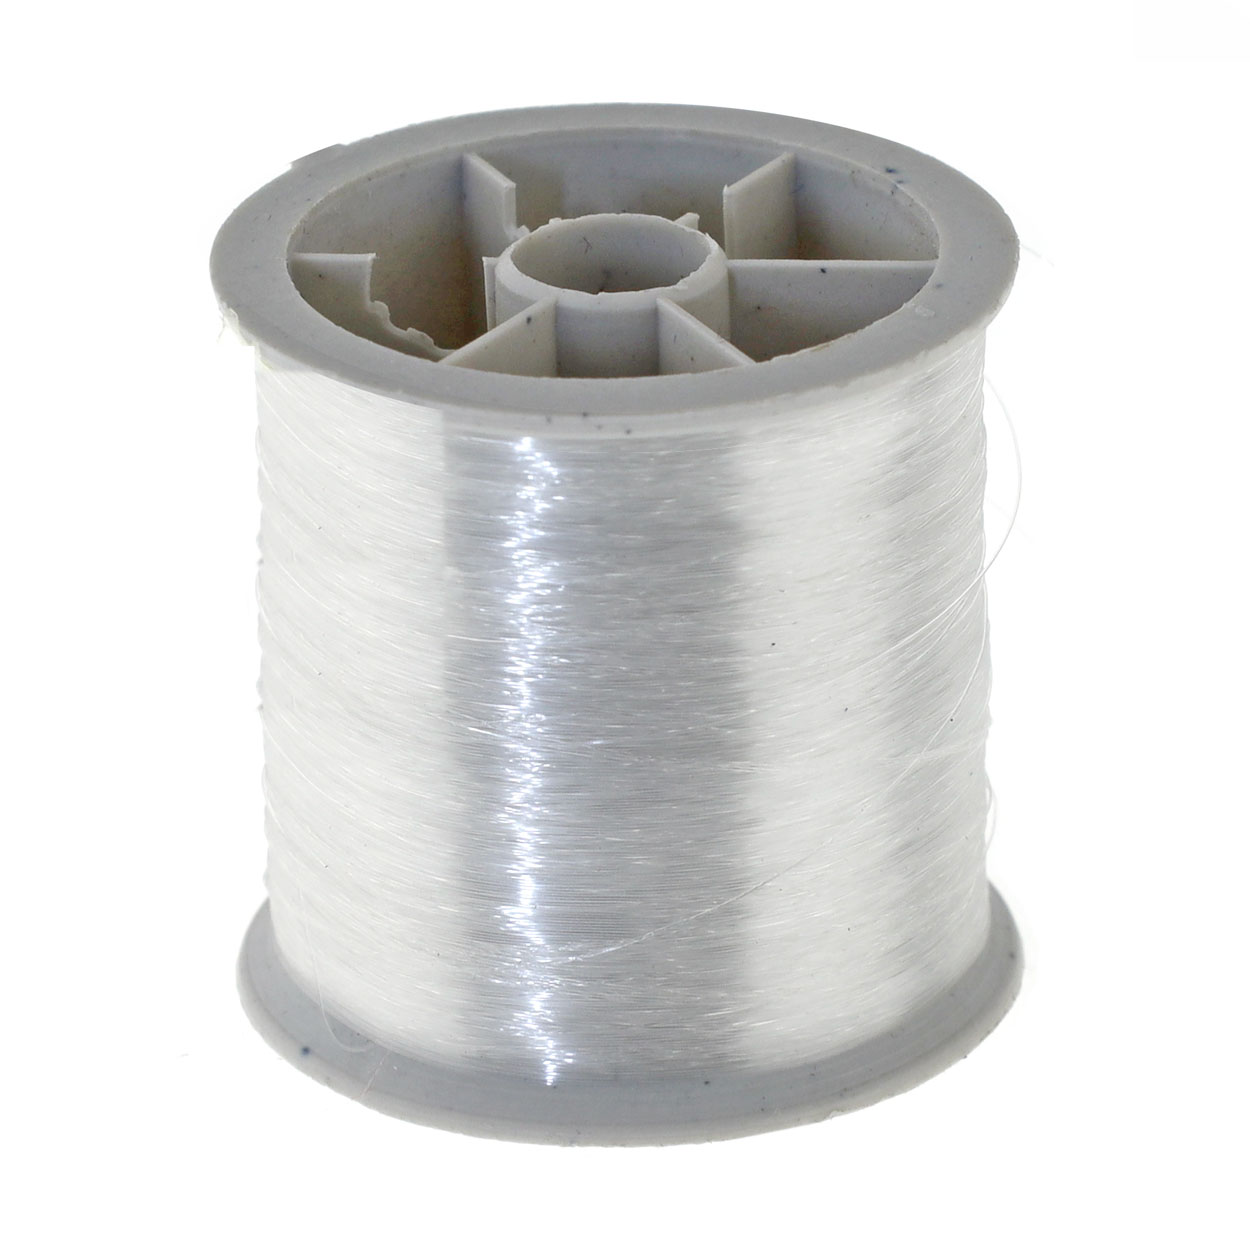 Nylon Clear Thread Invisible Thread For Quilting Clear Serger Thread,String  Be